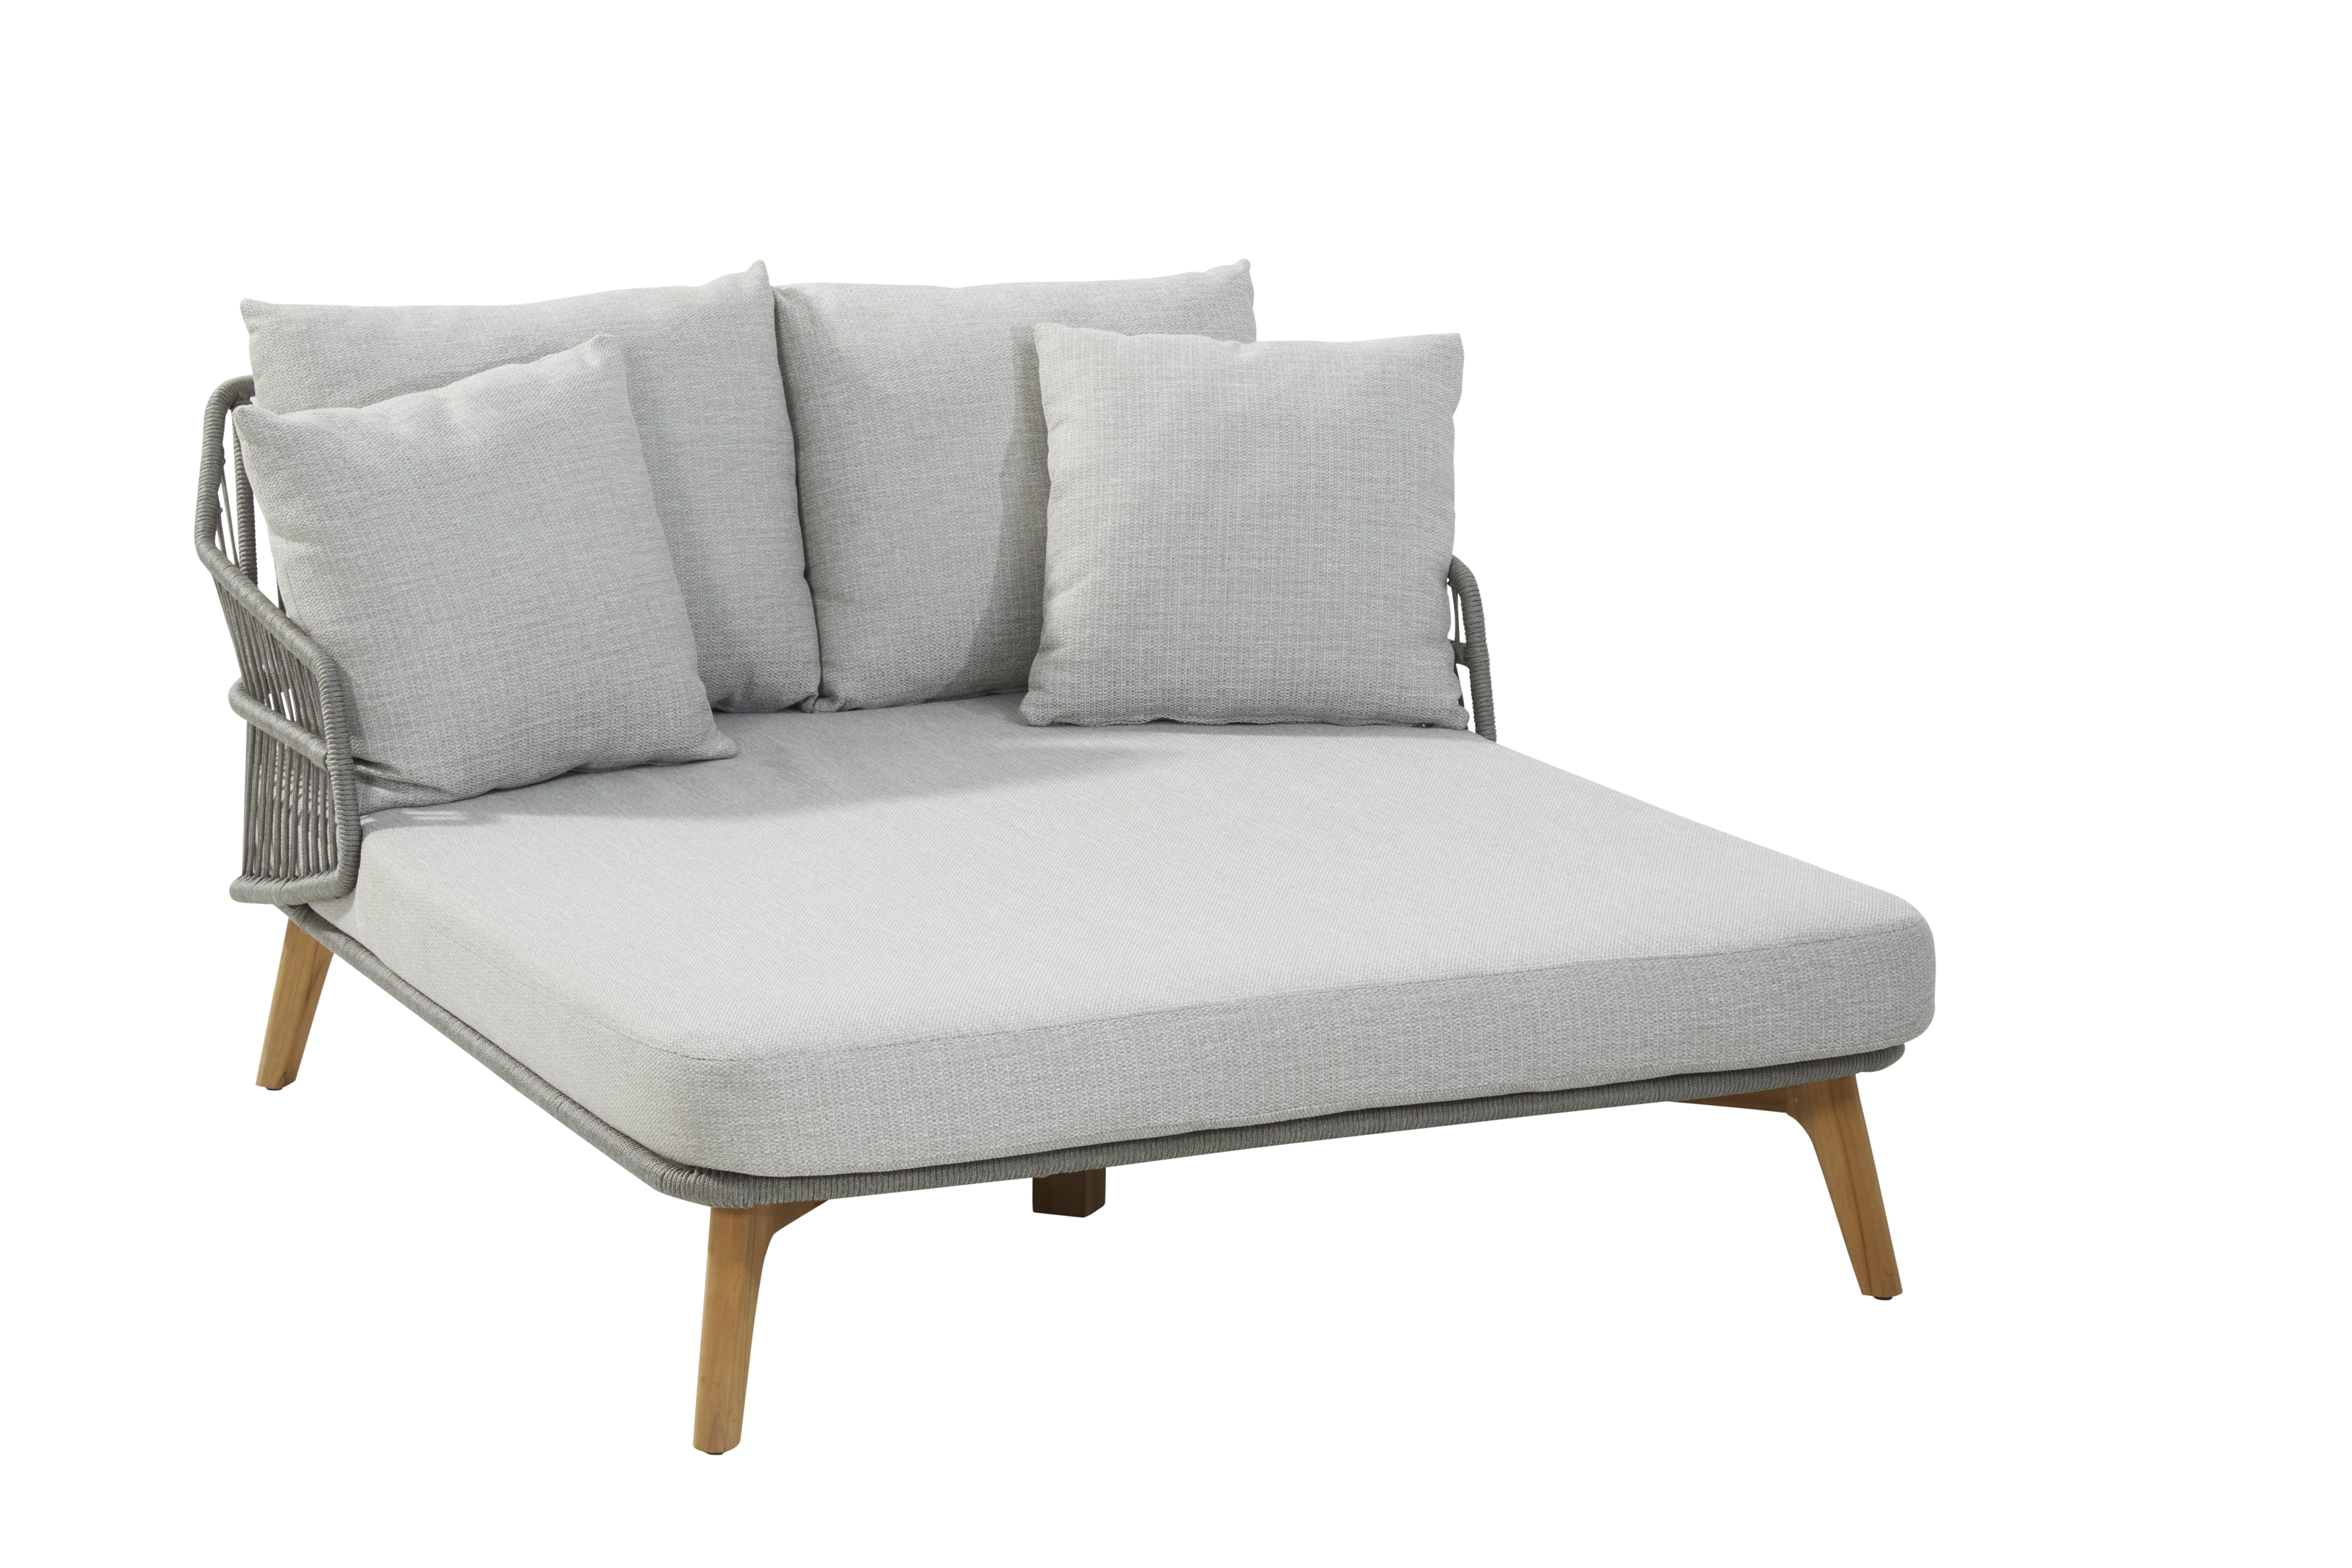 4 Seasons Outdoor Sempre Daybed Teak Silver Grey With 5 Cushions